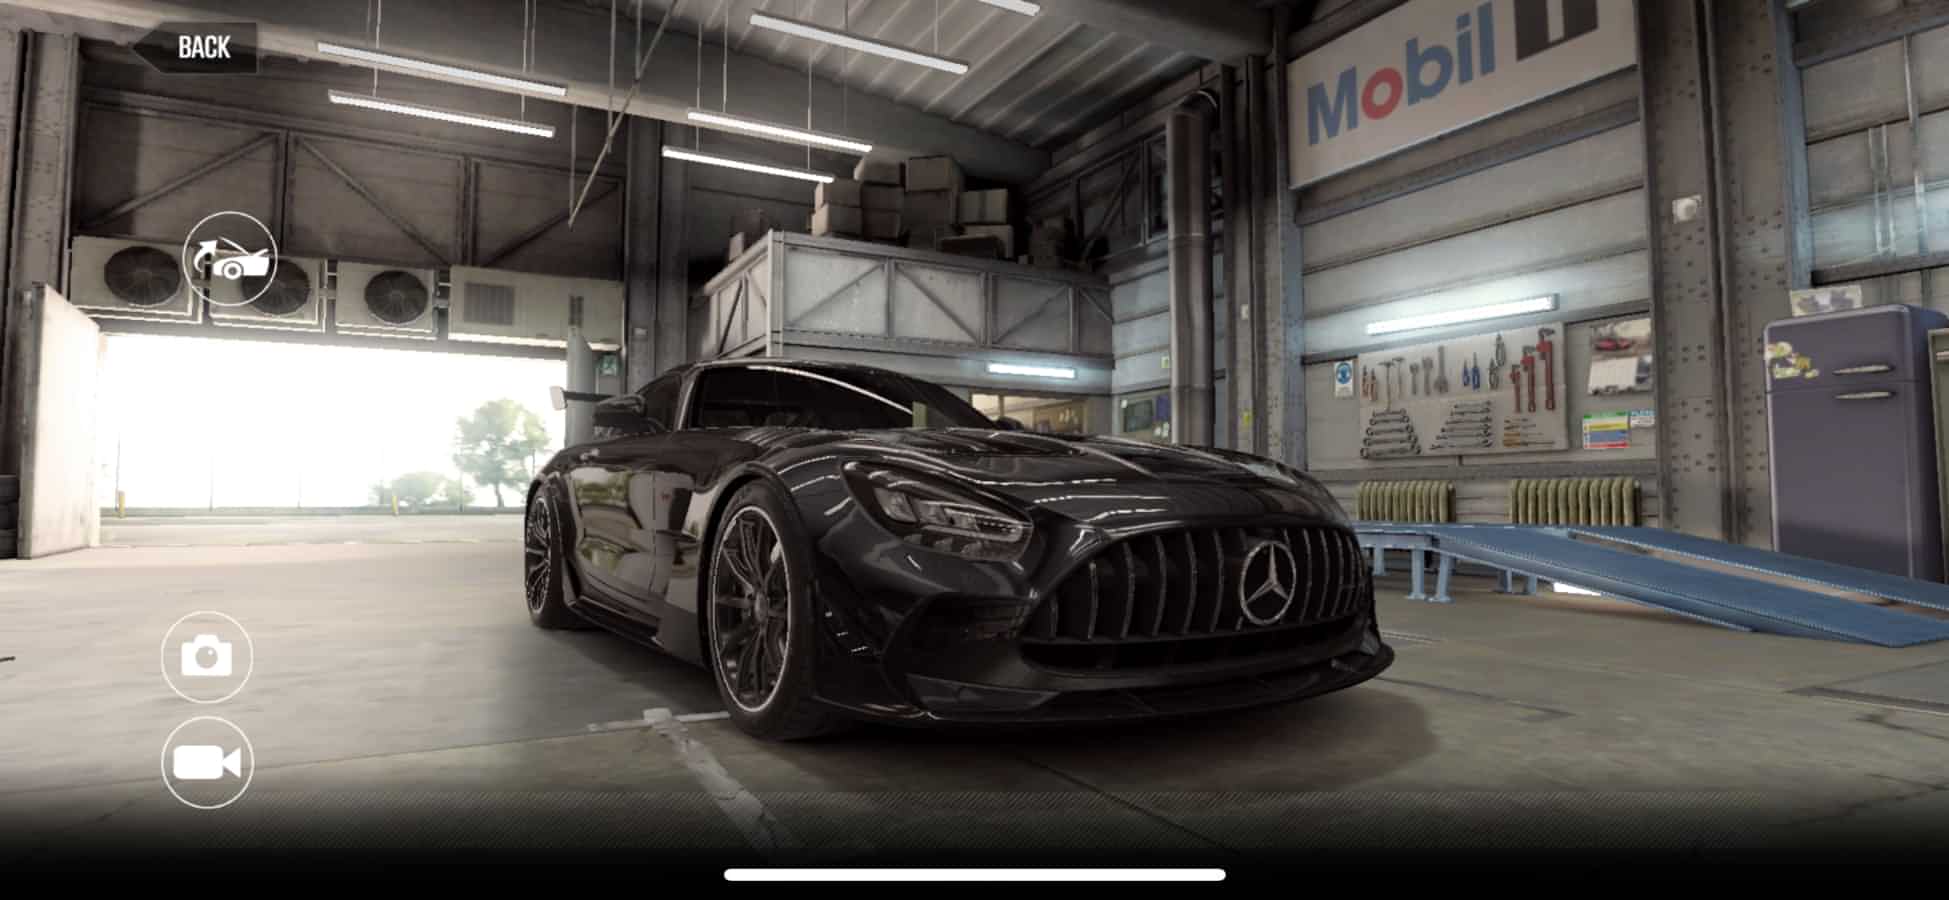 Mercedes Benz Amg Gt Black Series Csr2 Tune And Shift Pattern